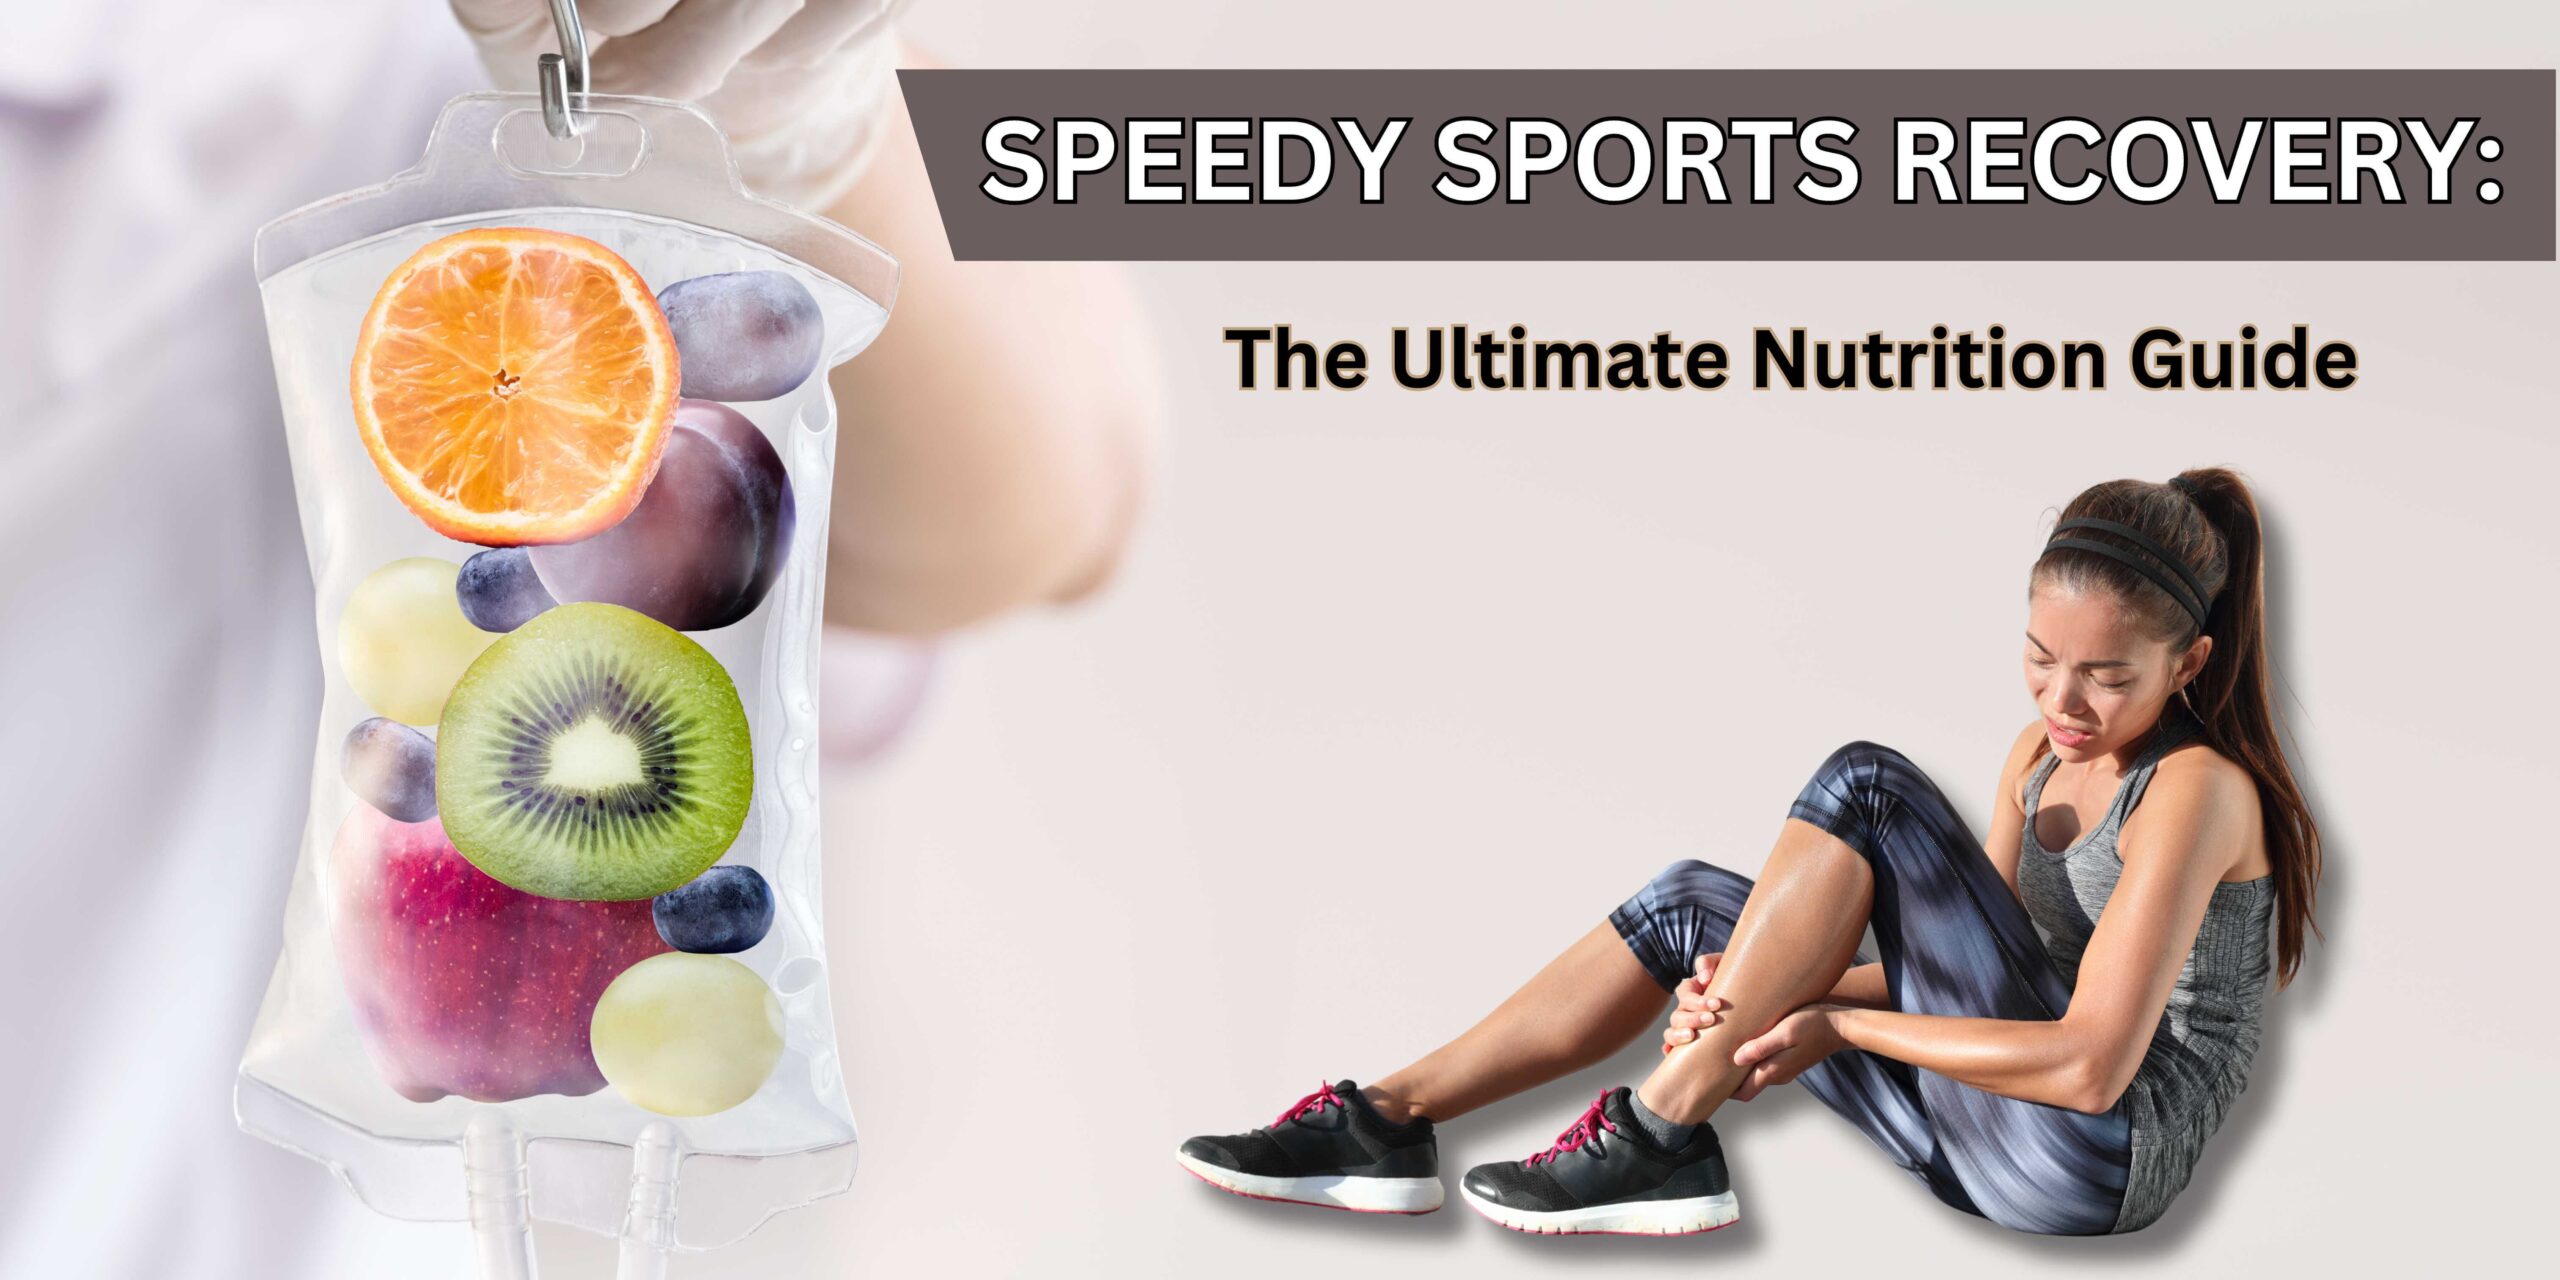 Speedy Sports Recovery The Ultimate Nutrition Guide